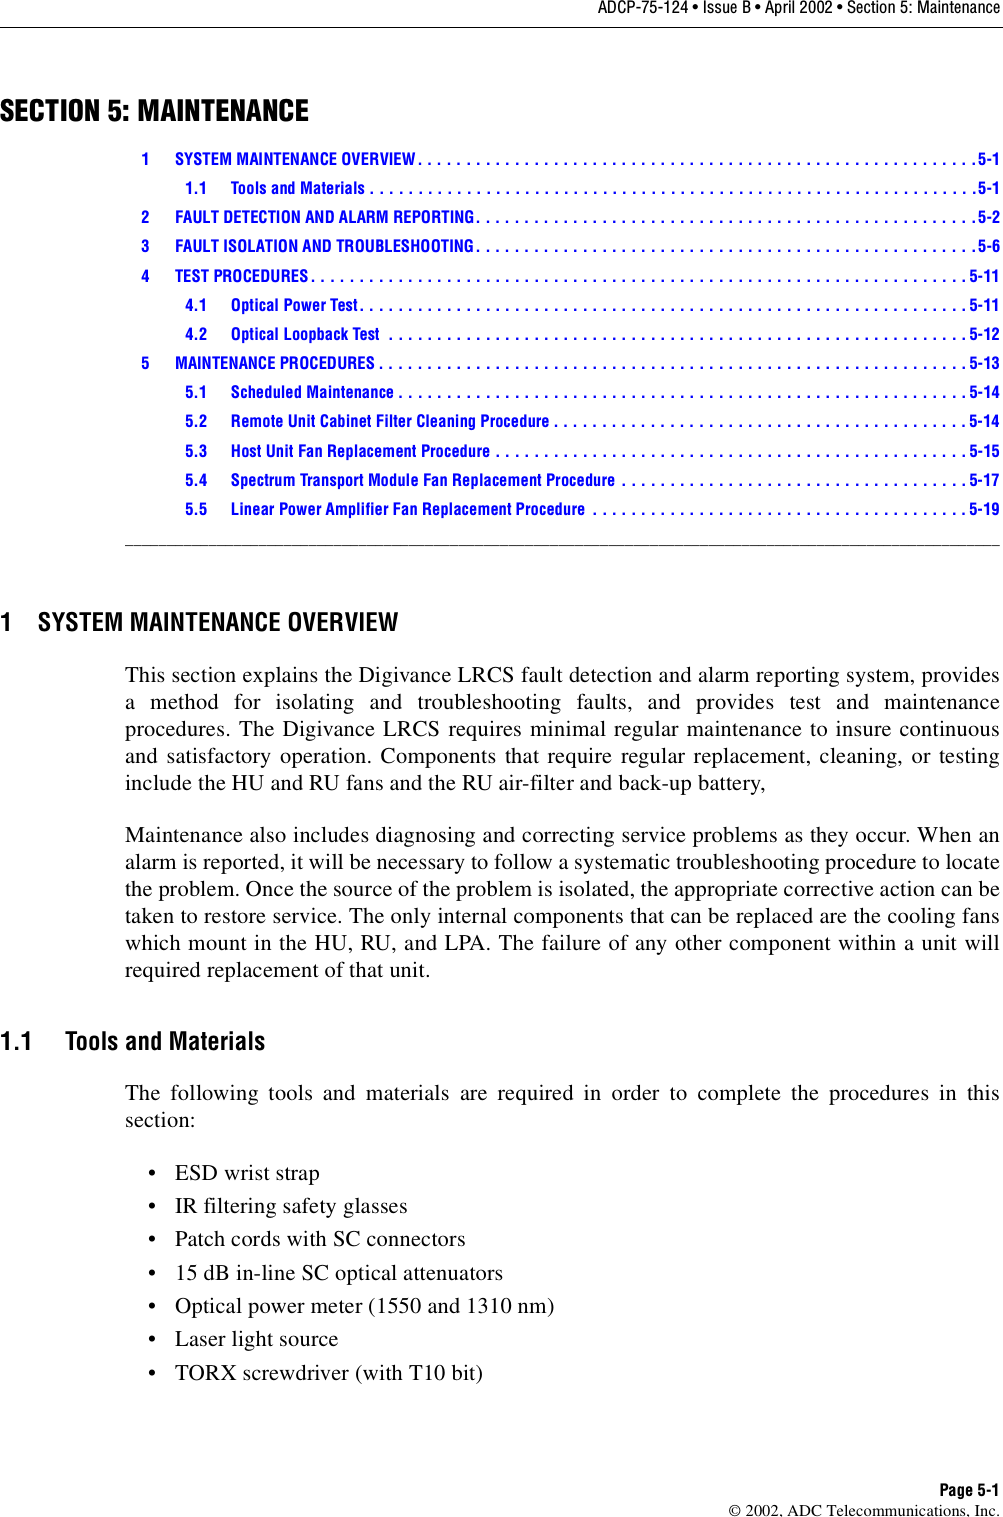 ADCP-75-124 • Issue B • April 2002 • Section 5: MaintenancePage 5-1©2002, ADC Telecommunications, Inc.SECTION 5: MAINTENANCE1 SYSTEM MAINTENANCE OVERVIEW. . . . . . . . . . . . . . . . . . . . . . . . . . . . . . . . . . . . . . . . . . . . . . . . . . . . . . . . . .5-11.1 Tools and Materials . . . . . . . . . . . . . . . . . . . . . . . . . . . . . . . . . . . . . . . . . . . . . . . . . . . . . . . . . . . . . . .5-12 FAULT DETECTION AND ALARM REPORTING. . . . . . . . . . . . . . . . . . . . . . . . . . . . . . . . . . . . . . . . . . . . . . . . . . . .5-23 FAULT ISOLATION AND TROUBLESHOOTING. . . . . . . . . . . . . . . . . . . . . . . . . . . . . . . . . . . . . . . . . . . . . . . . . . . .5-64 TEST PROCEDURES. . . . . . . . . . . . . . . . . . . . . . . . . . . . . . . . . . . . . . . . . . . . . . . . . . . . . . . . . . . . . . . . . . . . 5-114.1 Optical Power Test. . . . . . . . . . . . . . . . . . . . . . . . . . . . . . . . . . . . . . . . . . . . . . . . . . . . . . . . . . . . . . . 5-114.2 Optical Loopback Test  . . . . . . . . . . . . . . . . . . . . . . . . . . . . . . . . . . . . . . . . . . . . . . . . . . . . . . . . . . . . 5-125 MAINTENANCE PROCEDURES . . . . . . . . . . . . . . . . . . . . . . . . . . . . . . . . . . . . . . . . . . . . . . . . . . . . . . . . . . . . . 5-135.1 Scheduled Maintenance . . . . . . . . . . . . . . . . . . . . . . . . . . . . . . . . . . . . . . . . . . . . . . . . . . . . . . . . . . . 5-145.2 Remote Unit Cabinet Filter Cleaning Procedure . . . . . . . . . . . . . . . . . . . . . . . . . . . . . . . . . . . . . . . . . . . 5-145.3 Host Unit Fan Replacement Procedure . . . . . . . . . . . . . . . . . . . . . . . . . . . . . . . . . . . . . . . . . . . . . . . . . 5-155.4 Spectrum Transport Module Fan Replacement Procedure  . . . . . . . . . . . . . . . . . . . . . . . . . . . . . . . . . . . . 5-175.5 Linear Power Amplifier Fan Replacement Procedure  . . . . . . . . . . . . . . . . . . . . . . . . . . . . . . . . . . . . . . .5-19_________________________________________________________________________________________________________1 SYSTEM MAINTENANCE OVERVIEWThis section explains the Digivance LRCS fault detection and alarm reporting system, providesamethod for isolating and troubleshooting faults, and provides test and maintenanceprocedures. The Digivance LRCS requires minimal regular maintenance to insure continuousand satisfactory operation. Components that require regular replacement, cleaning, or testinginclude the HU and RU fans and the RU air-filter and back-up battery,Maintenance also includes diagnosing and correcting service problems as they occur. When analarm is reported, it will be necessary to follow asystematic troubleshooting procedure to locatethe problem. Once the source of the problem is isolated, the appropriate corrective action can betaken to restore service. The only internal components that can be replaced are the cooling fanswhich mount in the HU, RU, and LPA. The failure of any other component within aunit willrequired replacement of that unit.1.1 Tools and MaterialsThe following tools and materials are required in order to complete the procedures in thissection:•ESDwrist strap•IRfiltering safety glasses• Patch cords with SC connectors•15dB in-line SC optical attenuators•Opticalpower meter (1550 and 1310 nm)• Laser light source•TORXscrewdriver (with T10 bit)